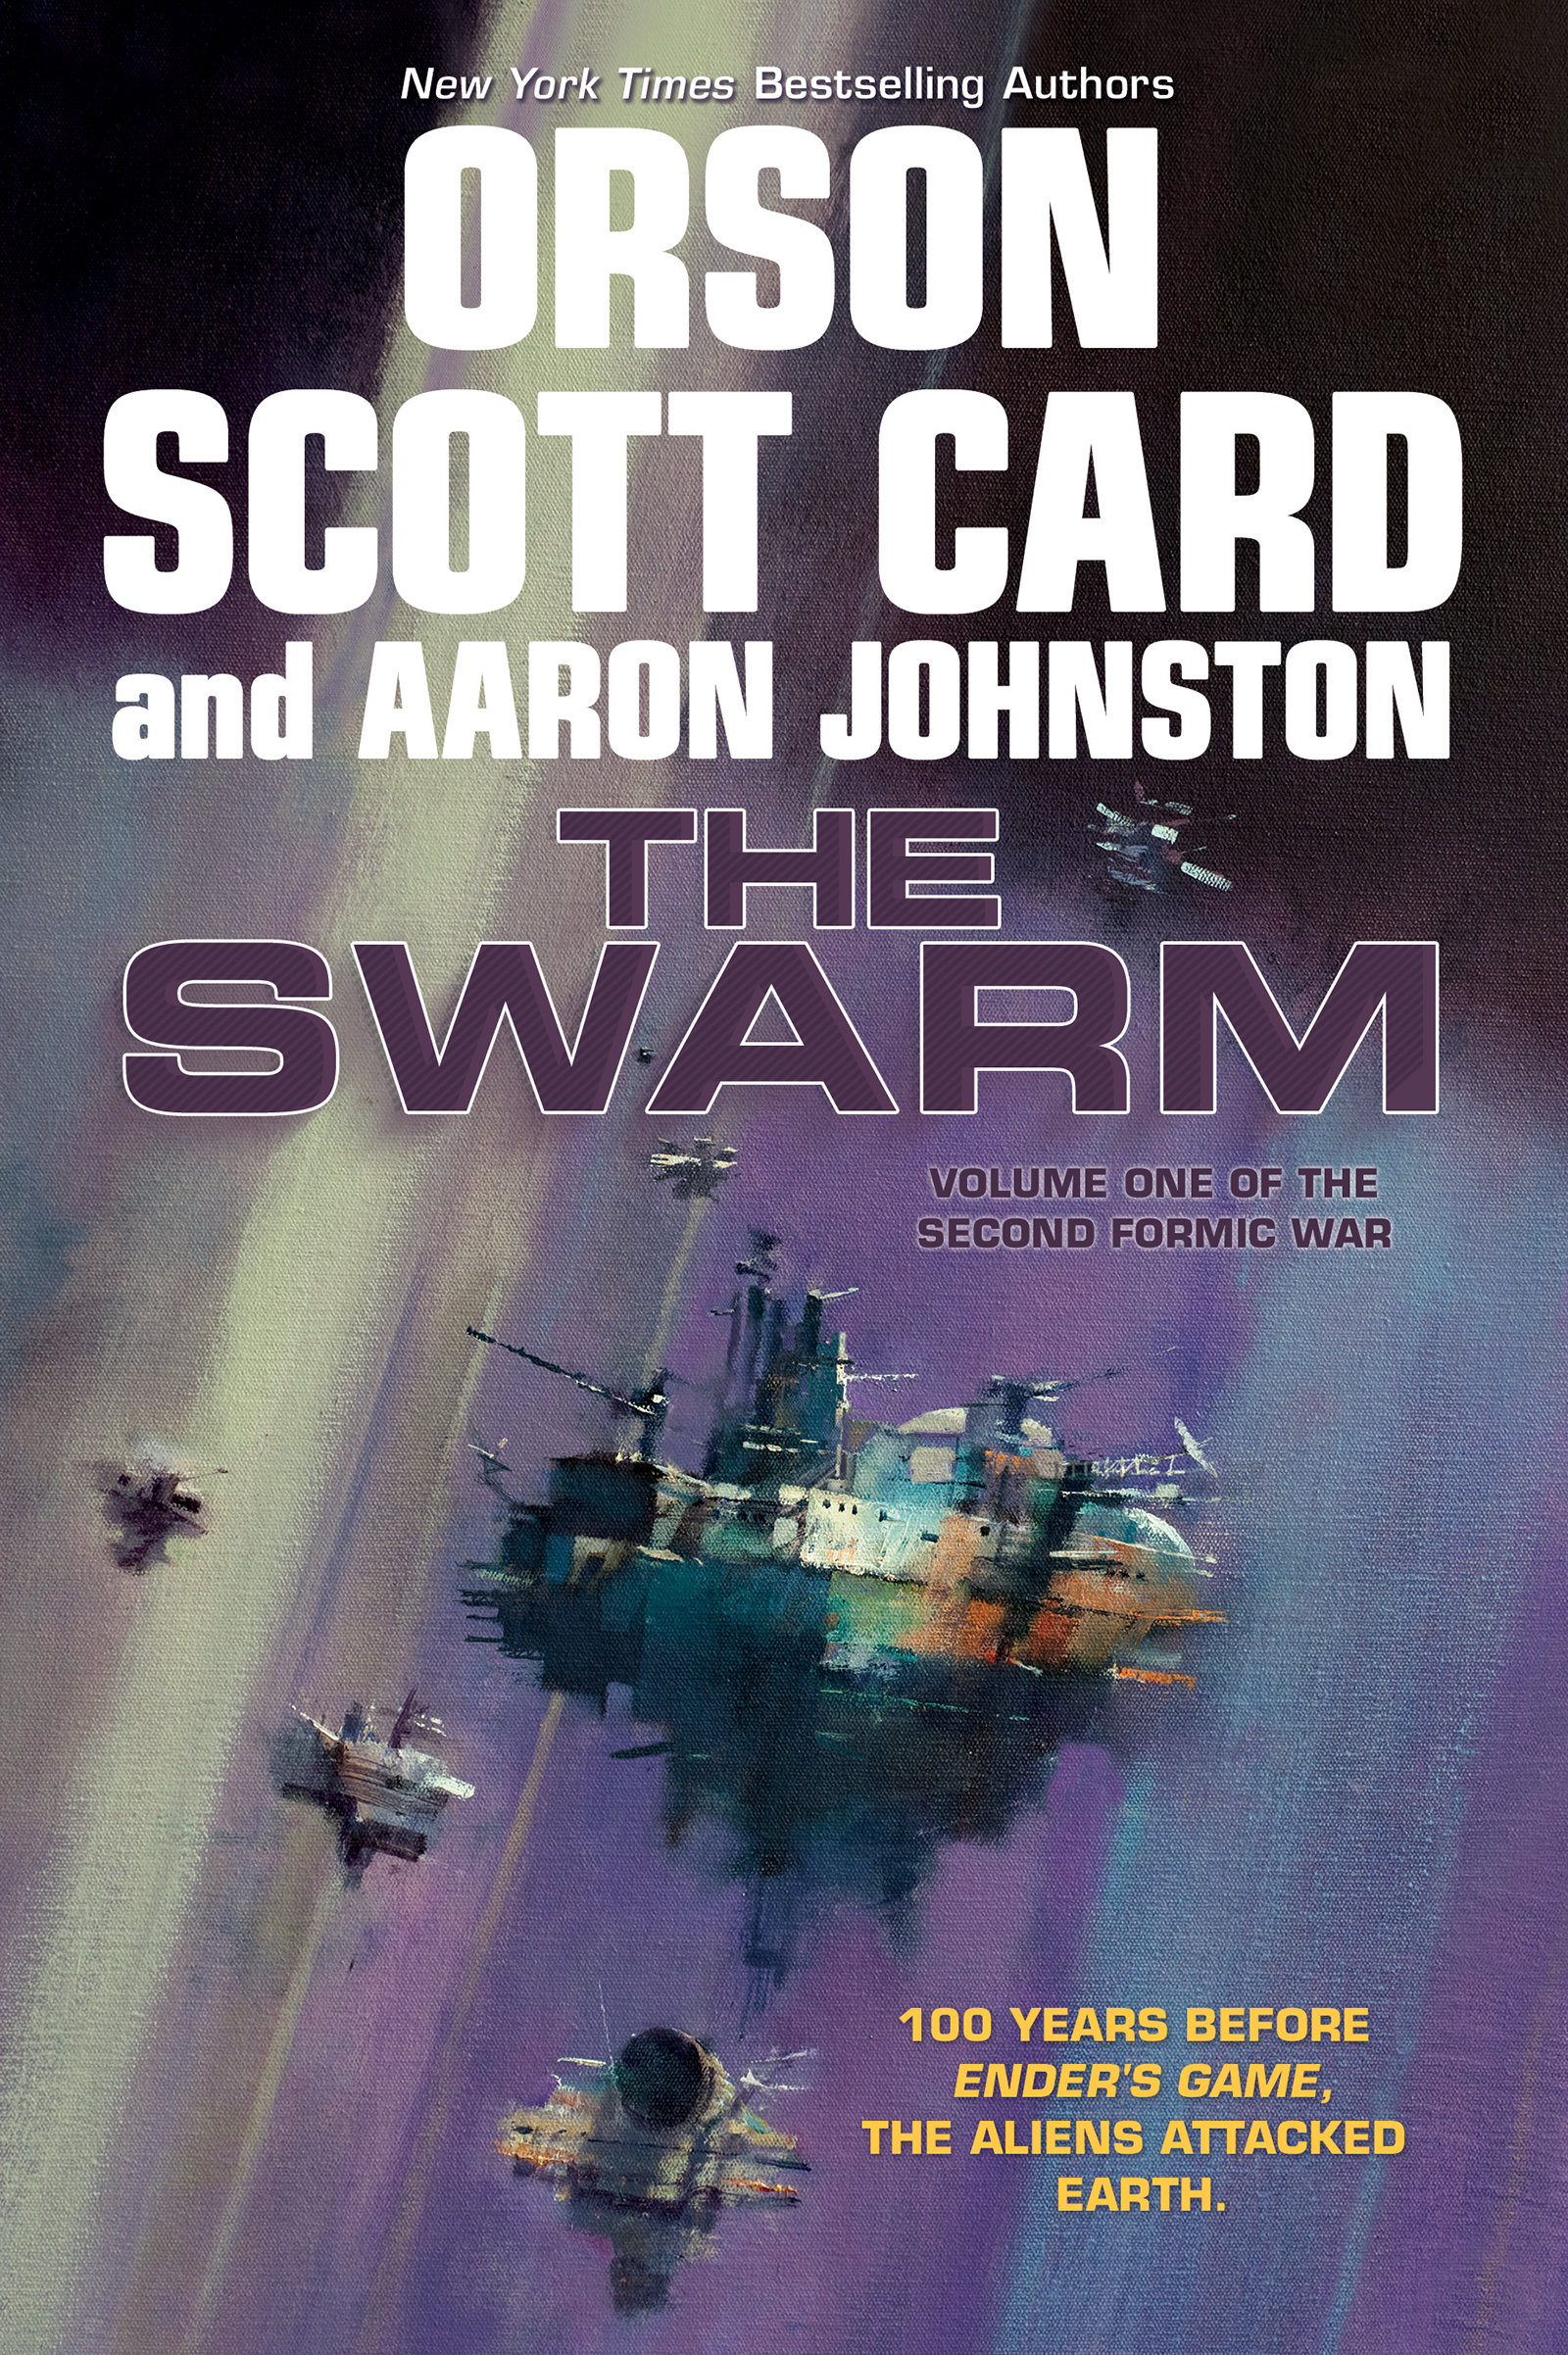 The Swarm : The Second Formic War (Volume 1) by Orson Scott Card, Aaron Johnston